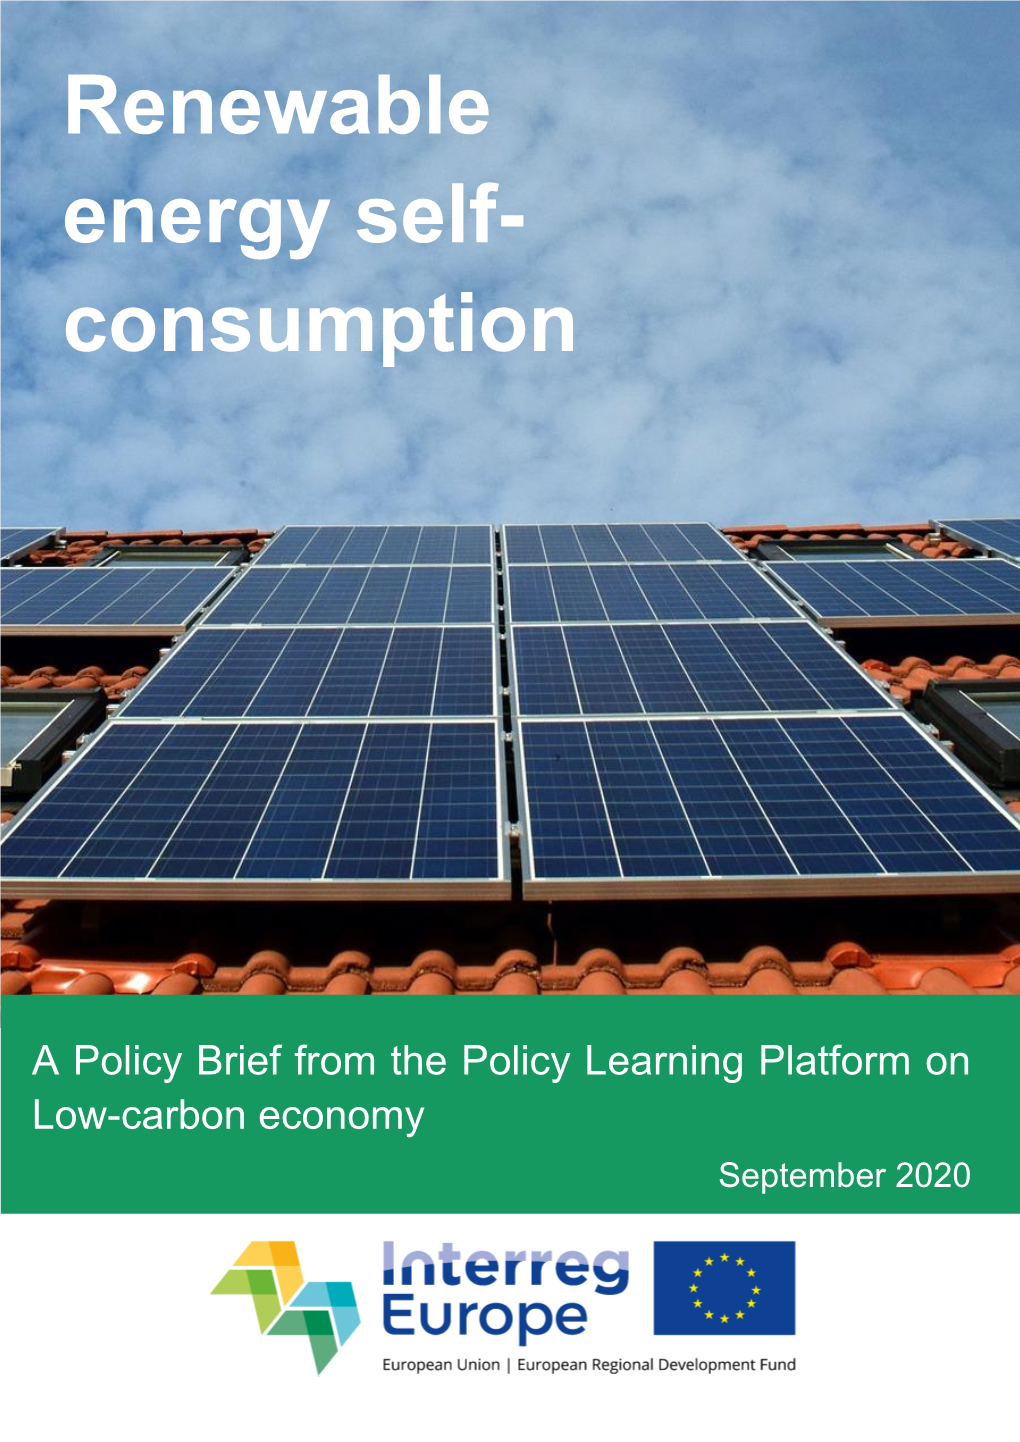 Policy Brief on Renewable Energy Self-Consumption